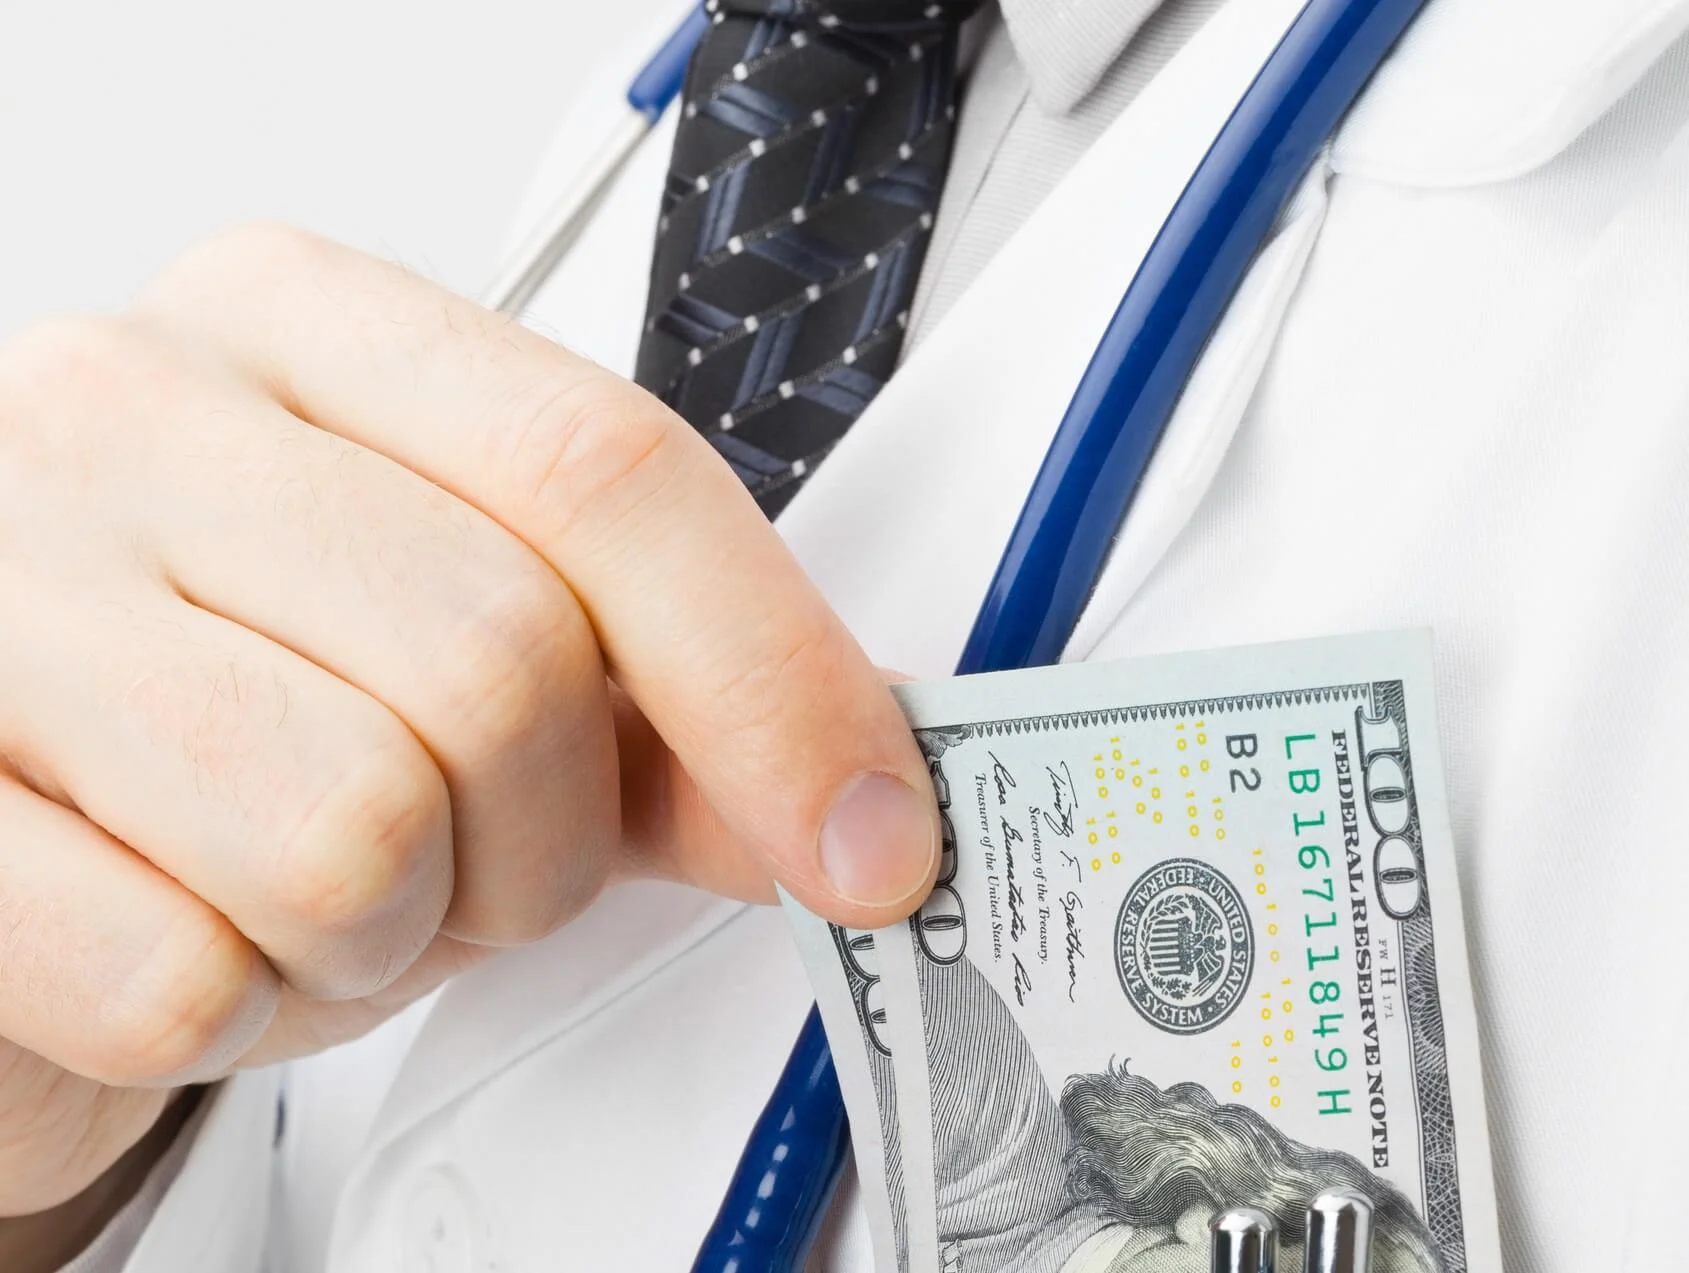 How Choosing a General Practitioner Can Save Time & Money